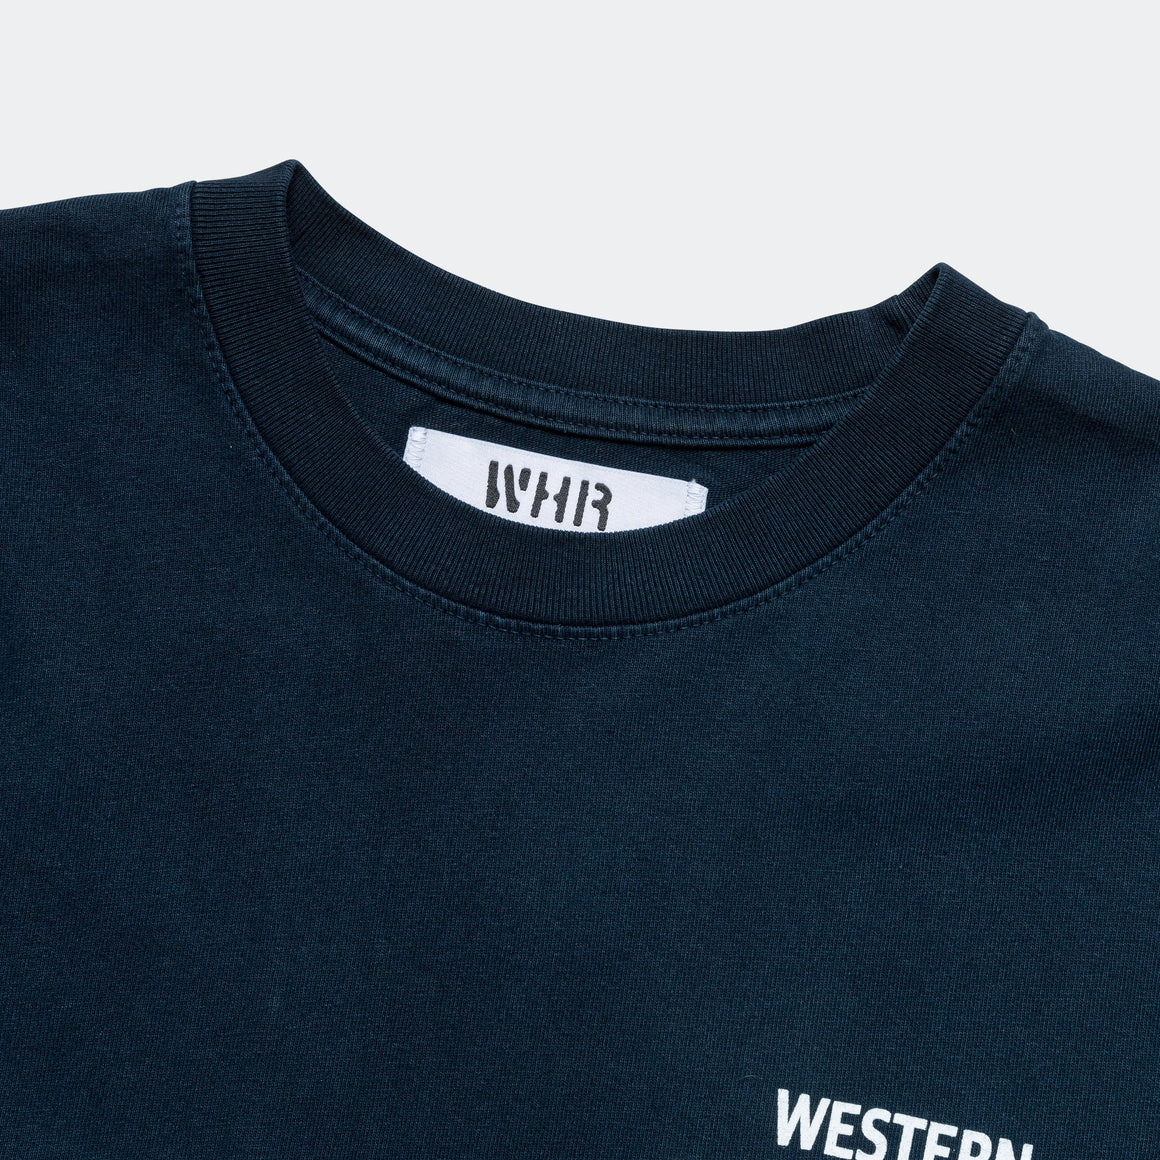 Western Hydrodynamic Research - Worker S/S Tee - Navy - UP THERE